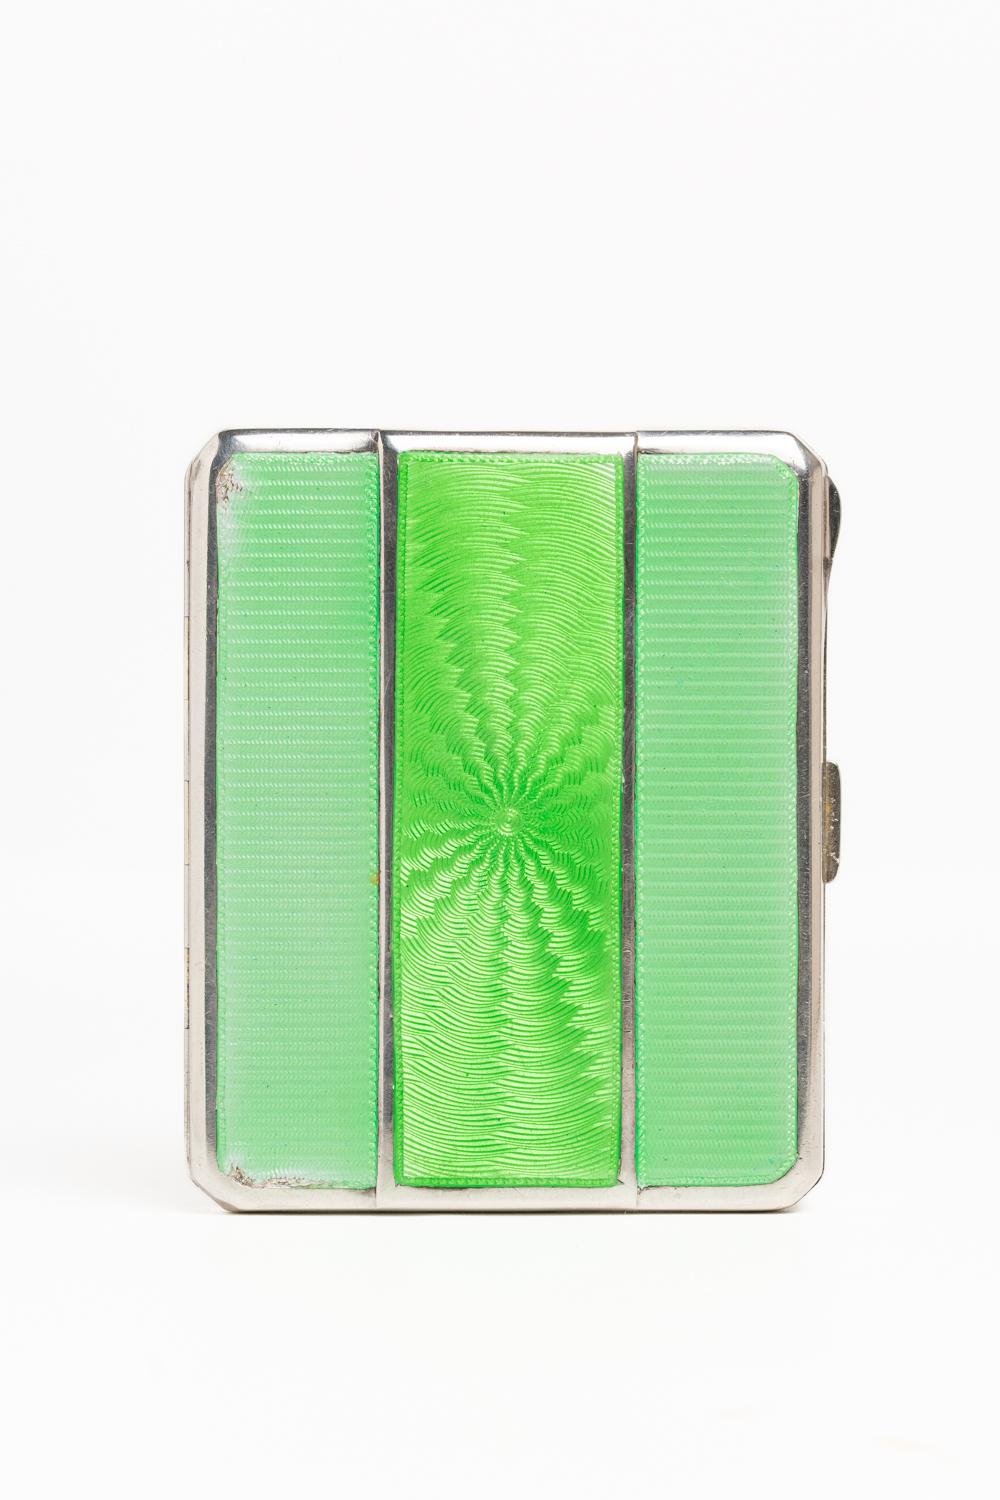 Rare and beautiful Art Deco pale green guilloche enamel and silver rectangular cigarette case by well known silversmiths Mappin and Webb, Birmingham 1933. The cigarette case has three panels, the central one with a sunburst design made in a darker